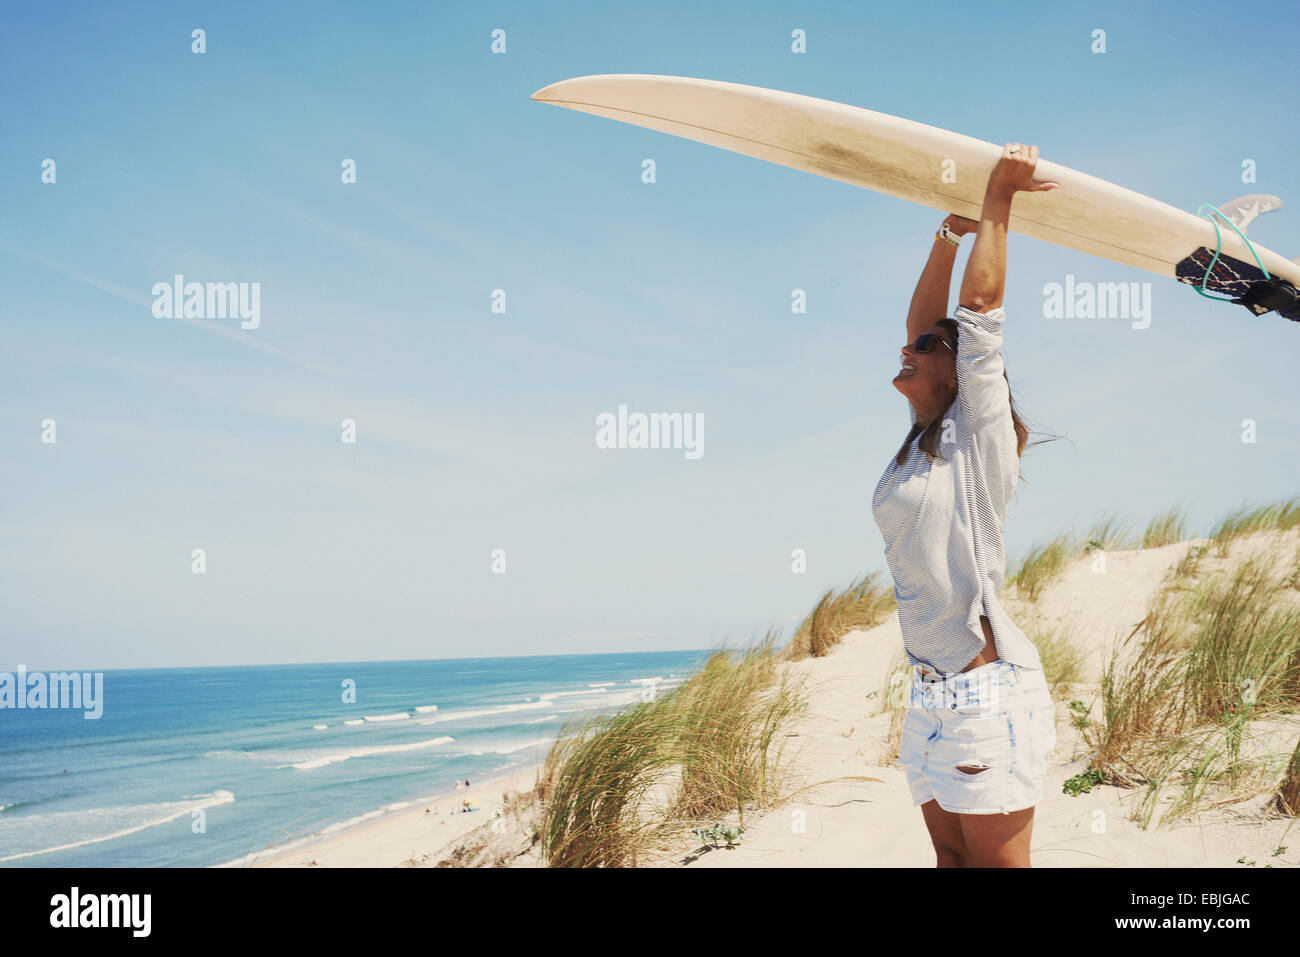 Woman with surfboard on beach, Lacanau, France Banque D'Images